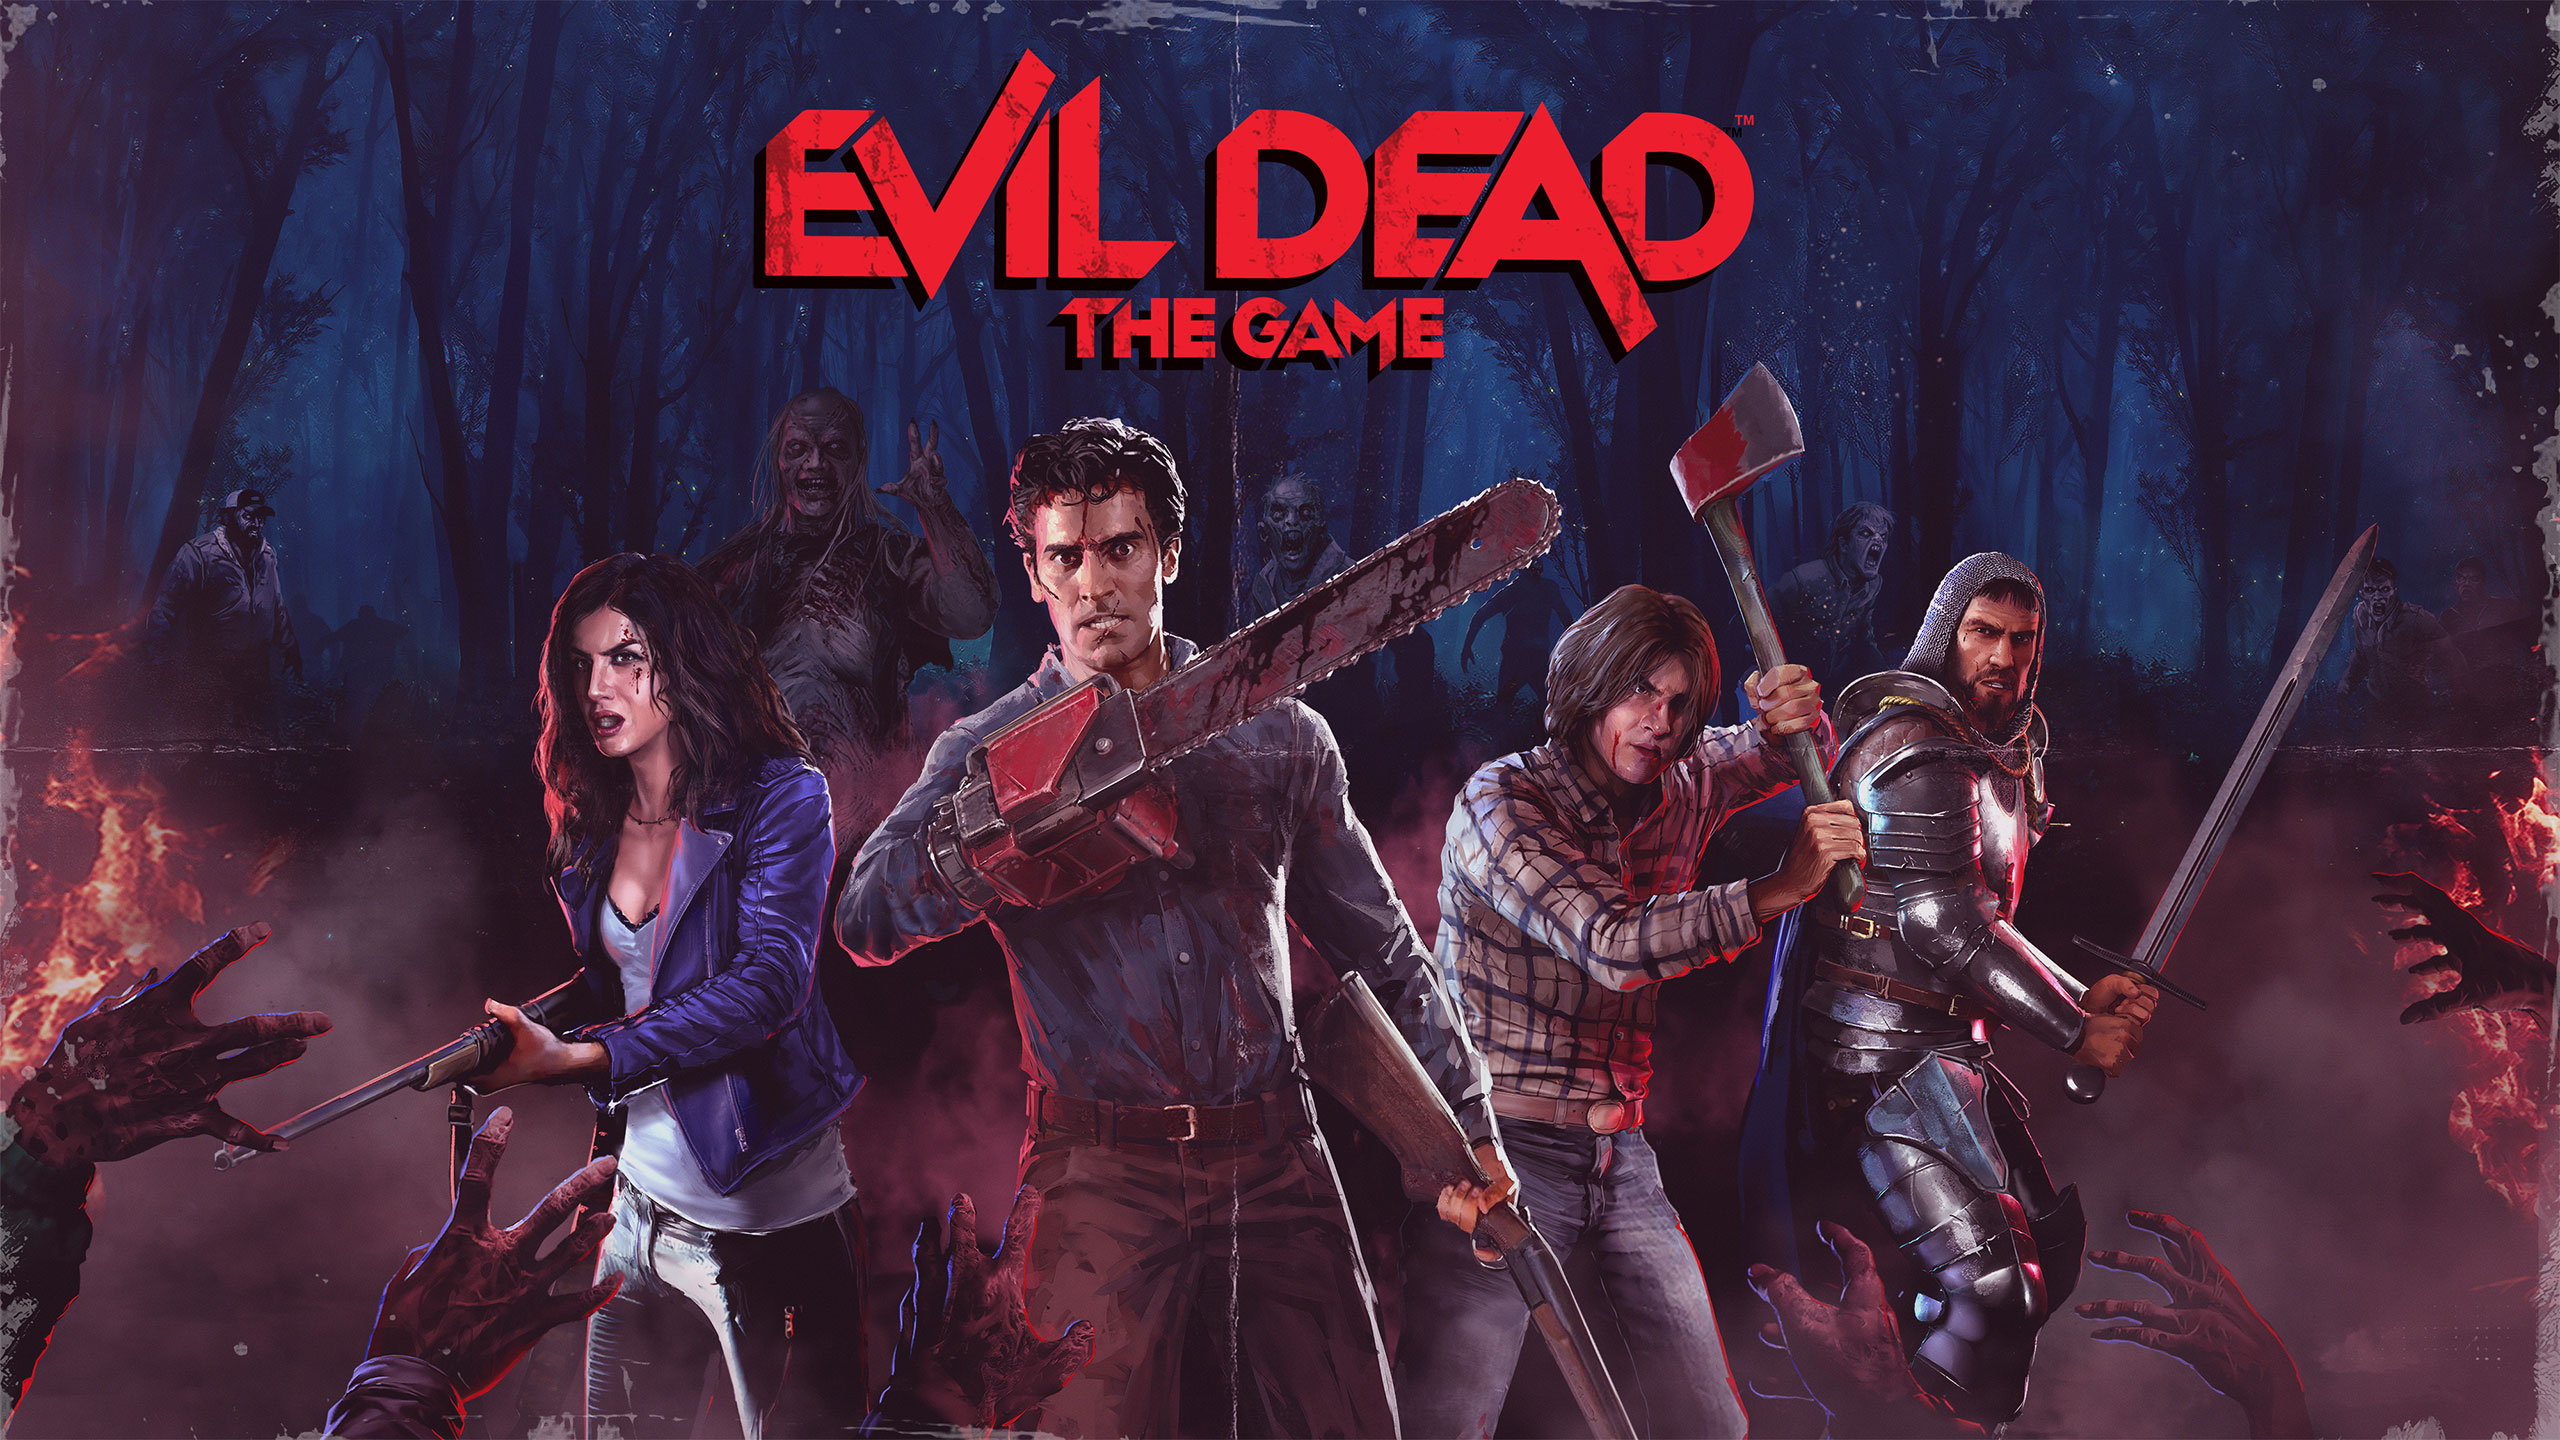 evil dead sold over half a million copies in five days!